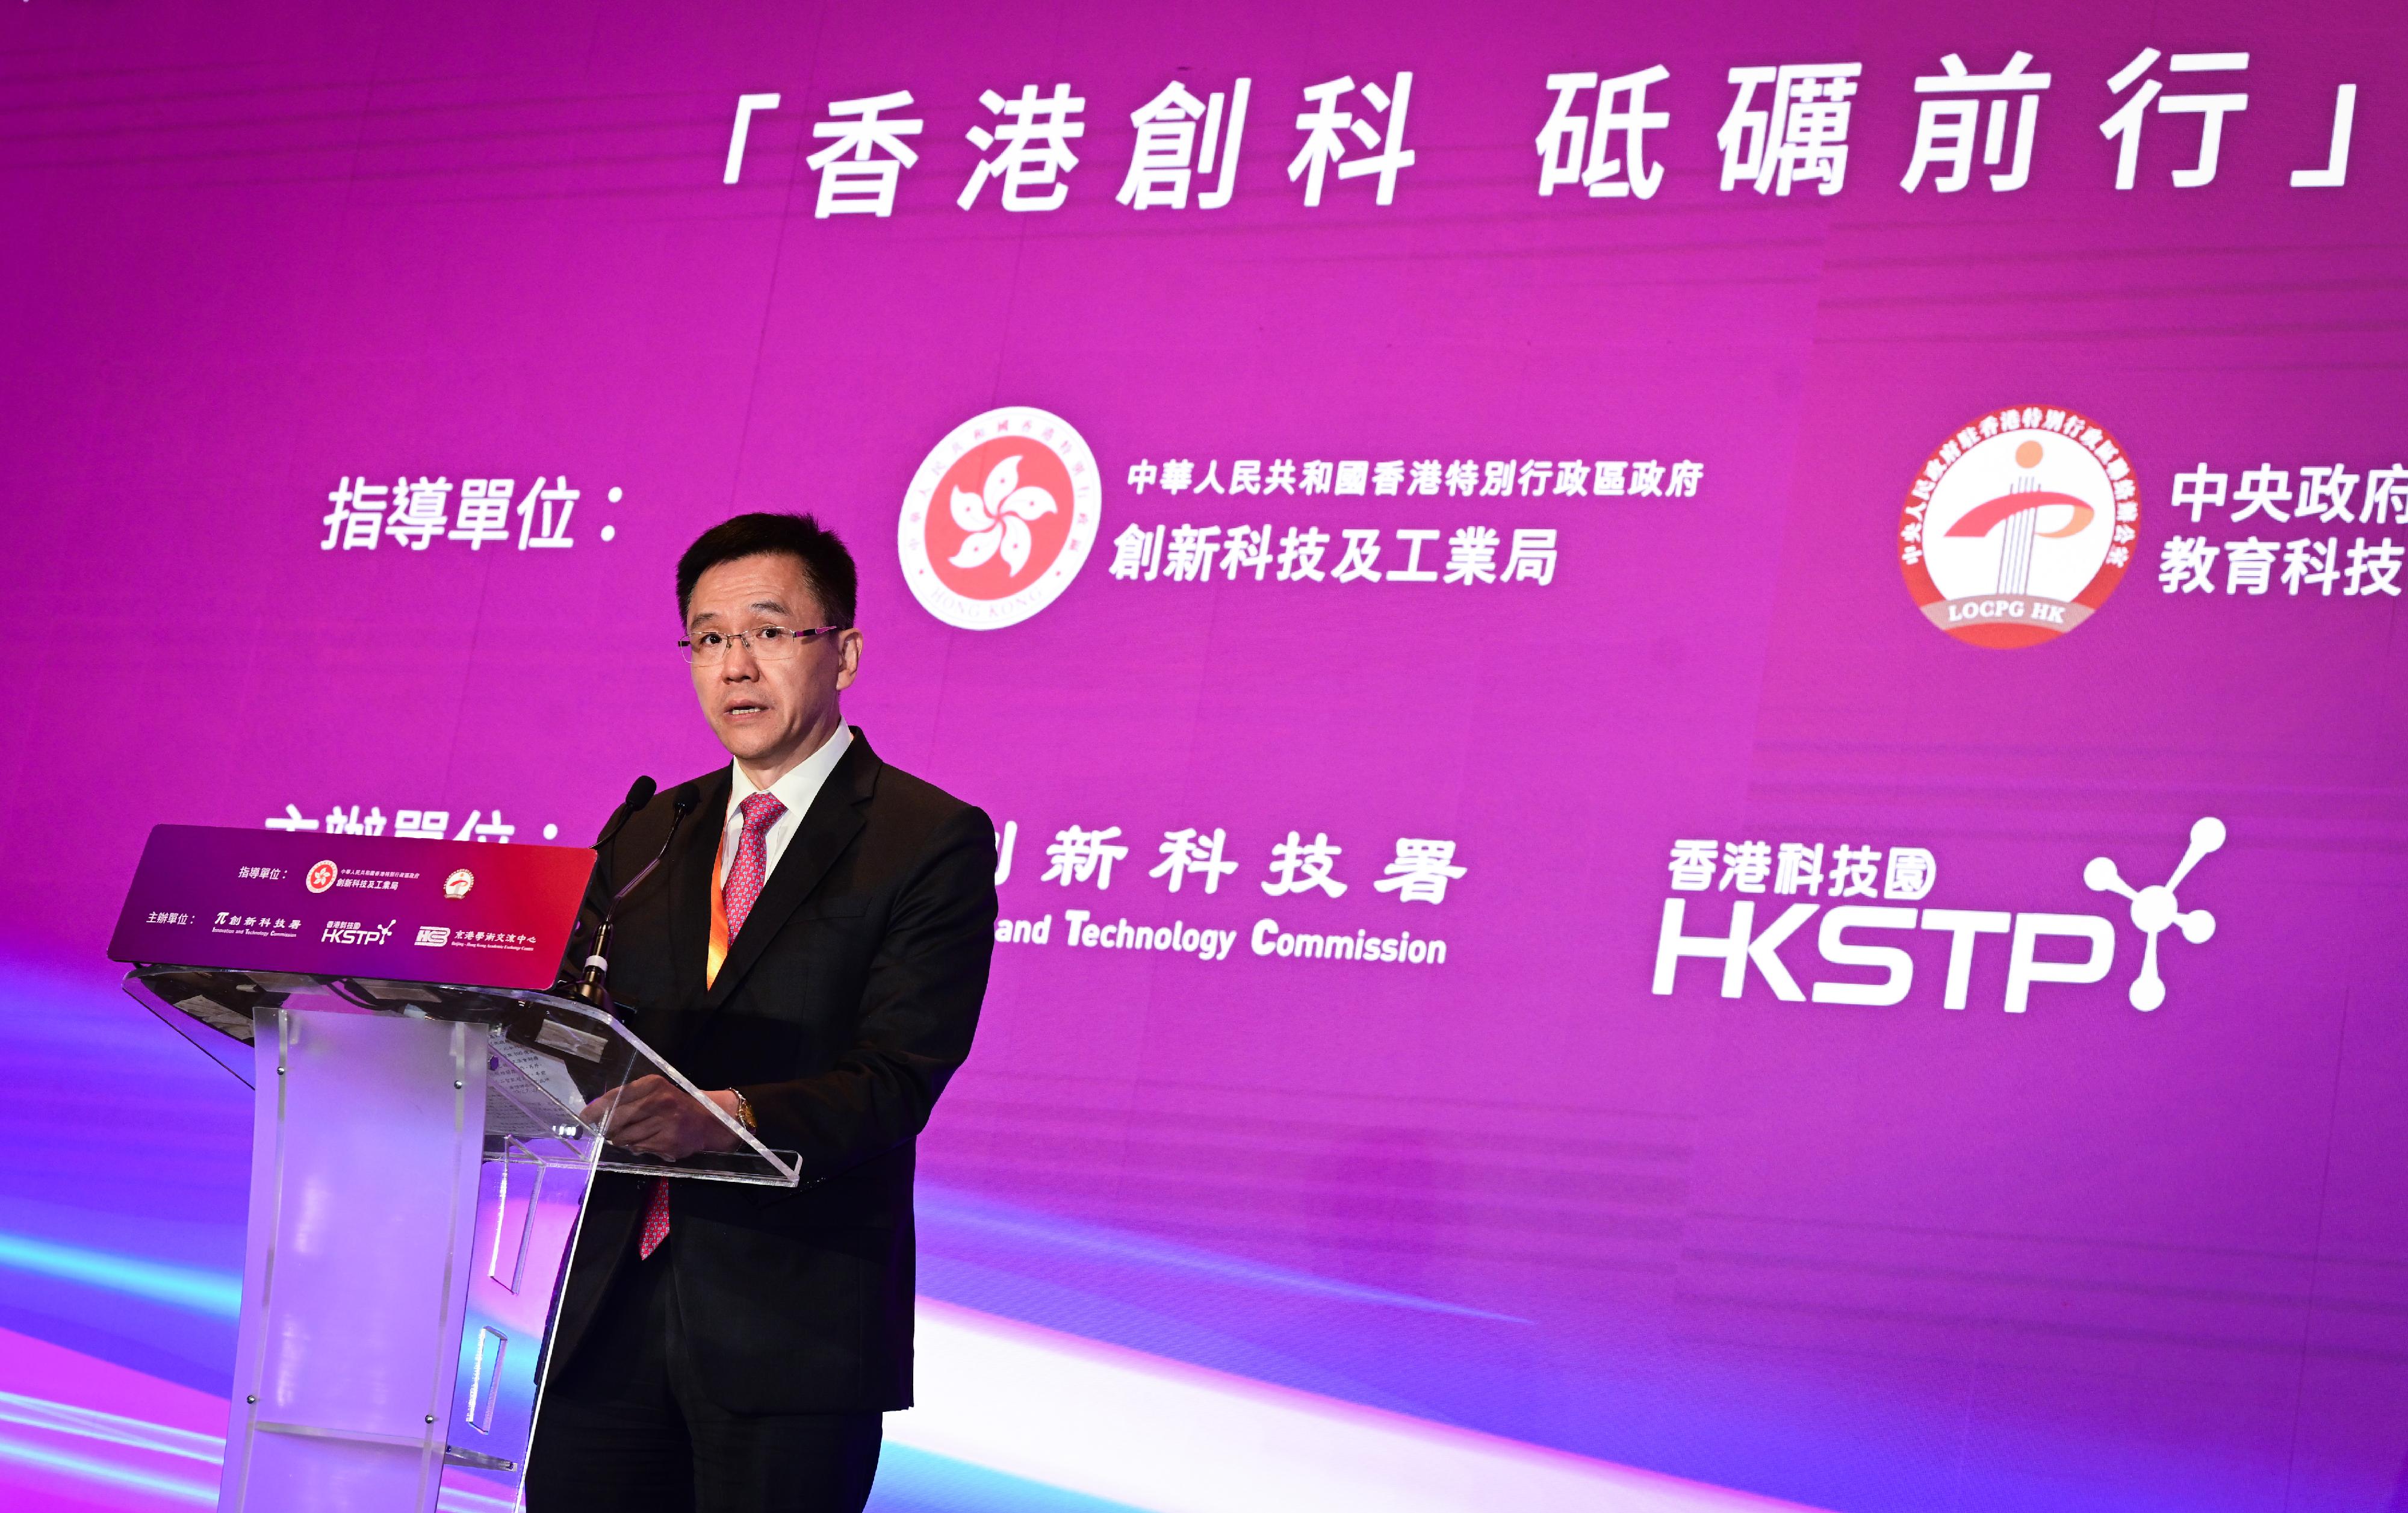 The Secretary for Innovation, Technology and Industry, Professor Sun Dong, speaks at Hong Kong I&T Strives Ahead forum to mark the anniversary of President Xi Jinping’s visit to the Hong Kong Science Park and celebrate the 26th anniversary of the establishment of the Hong Kong Special Administrative Region today (June 30).